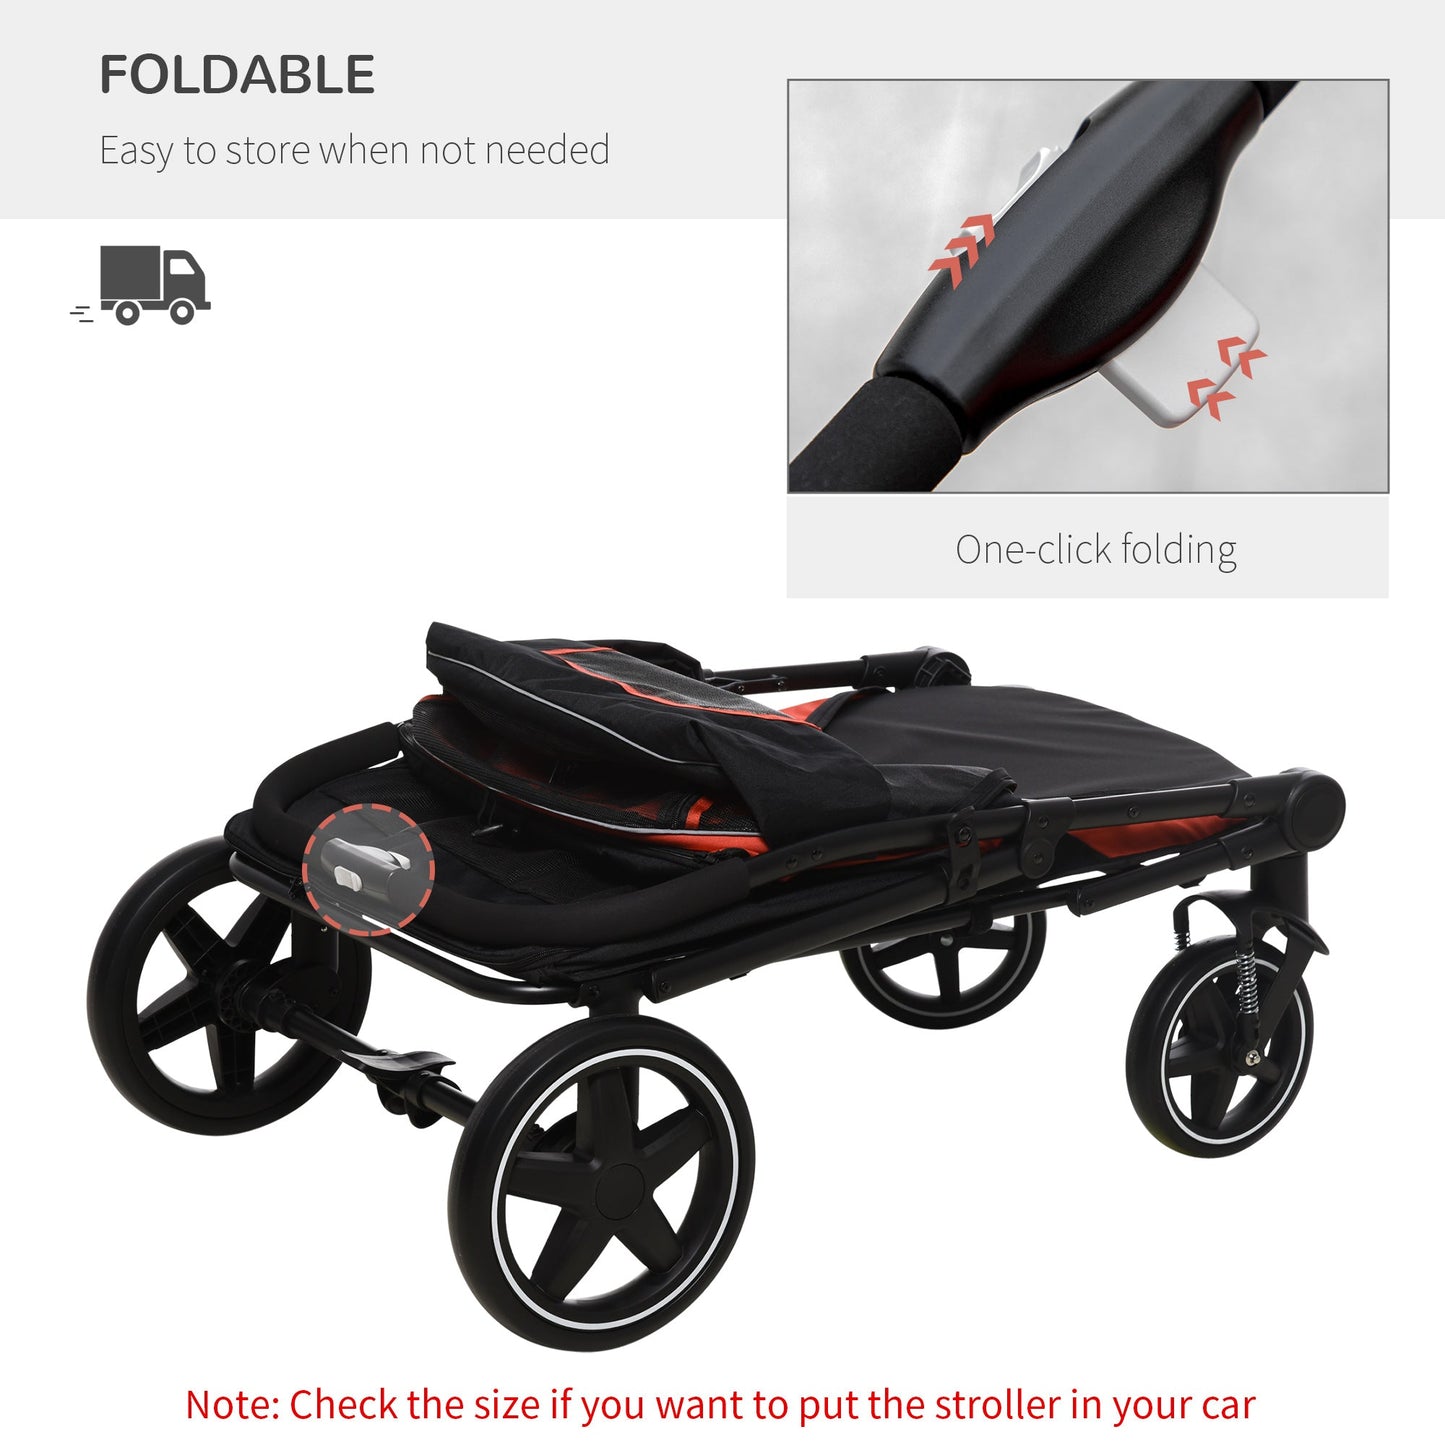 Pet Supplies-Pet Stroller with Universal Front Wheels, Shock Absorber, One Click Foldable Dog Cat Carriage with Brakes, Storage Bags, Mesh Window - Red - Outdoor Style Company